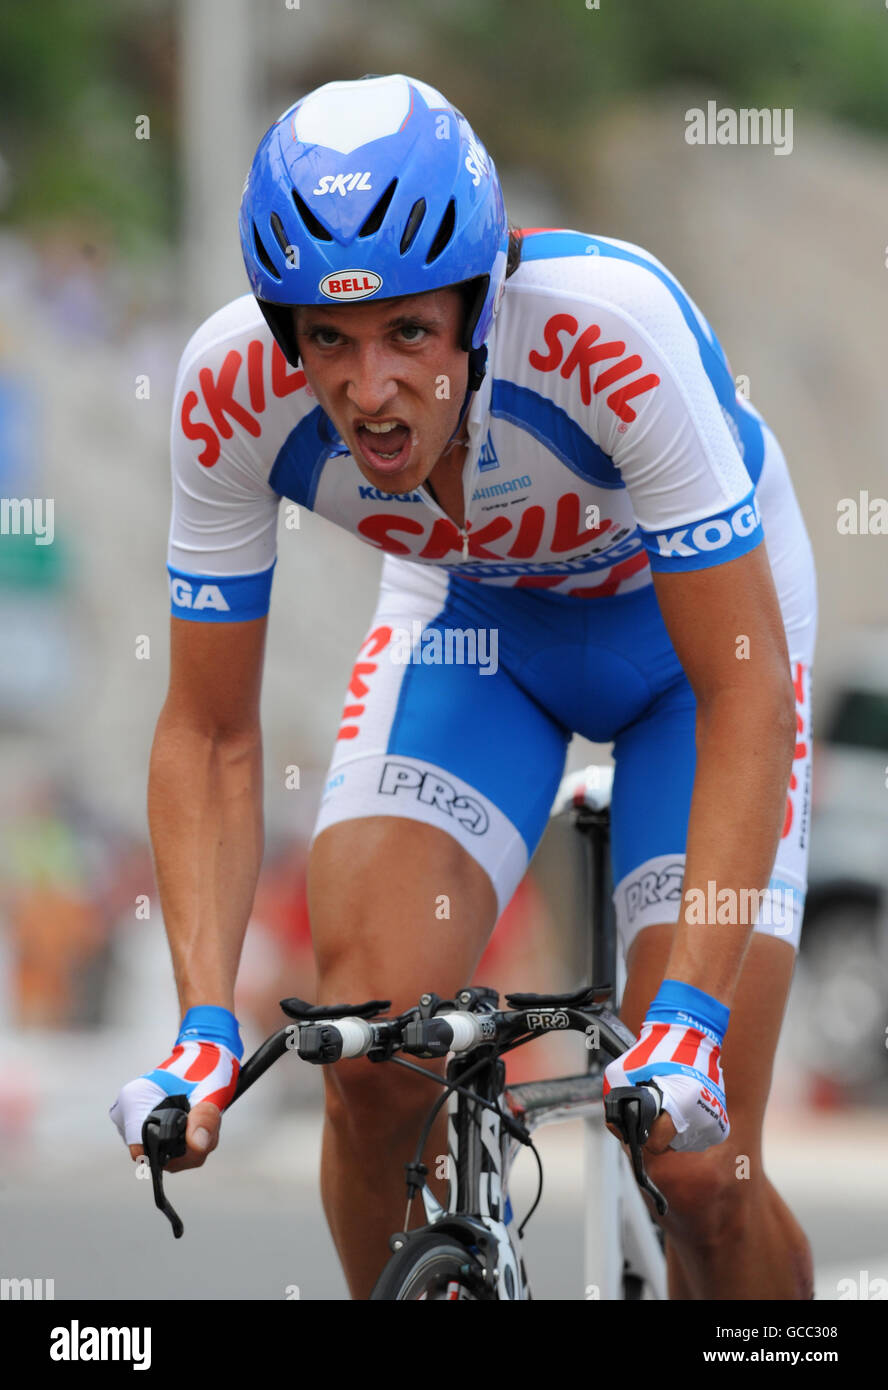 Cycling - Tour de France 2009 - Stage One Stock Photo - Alamy